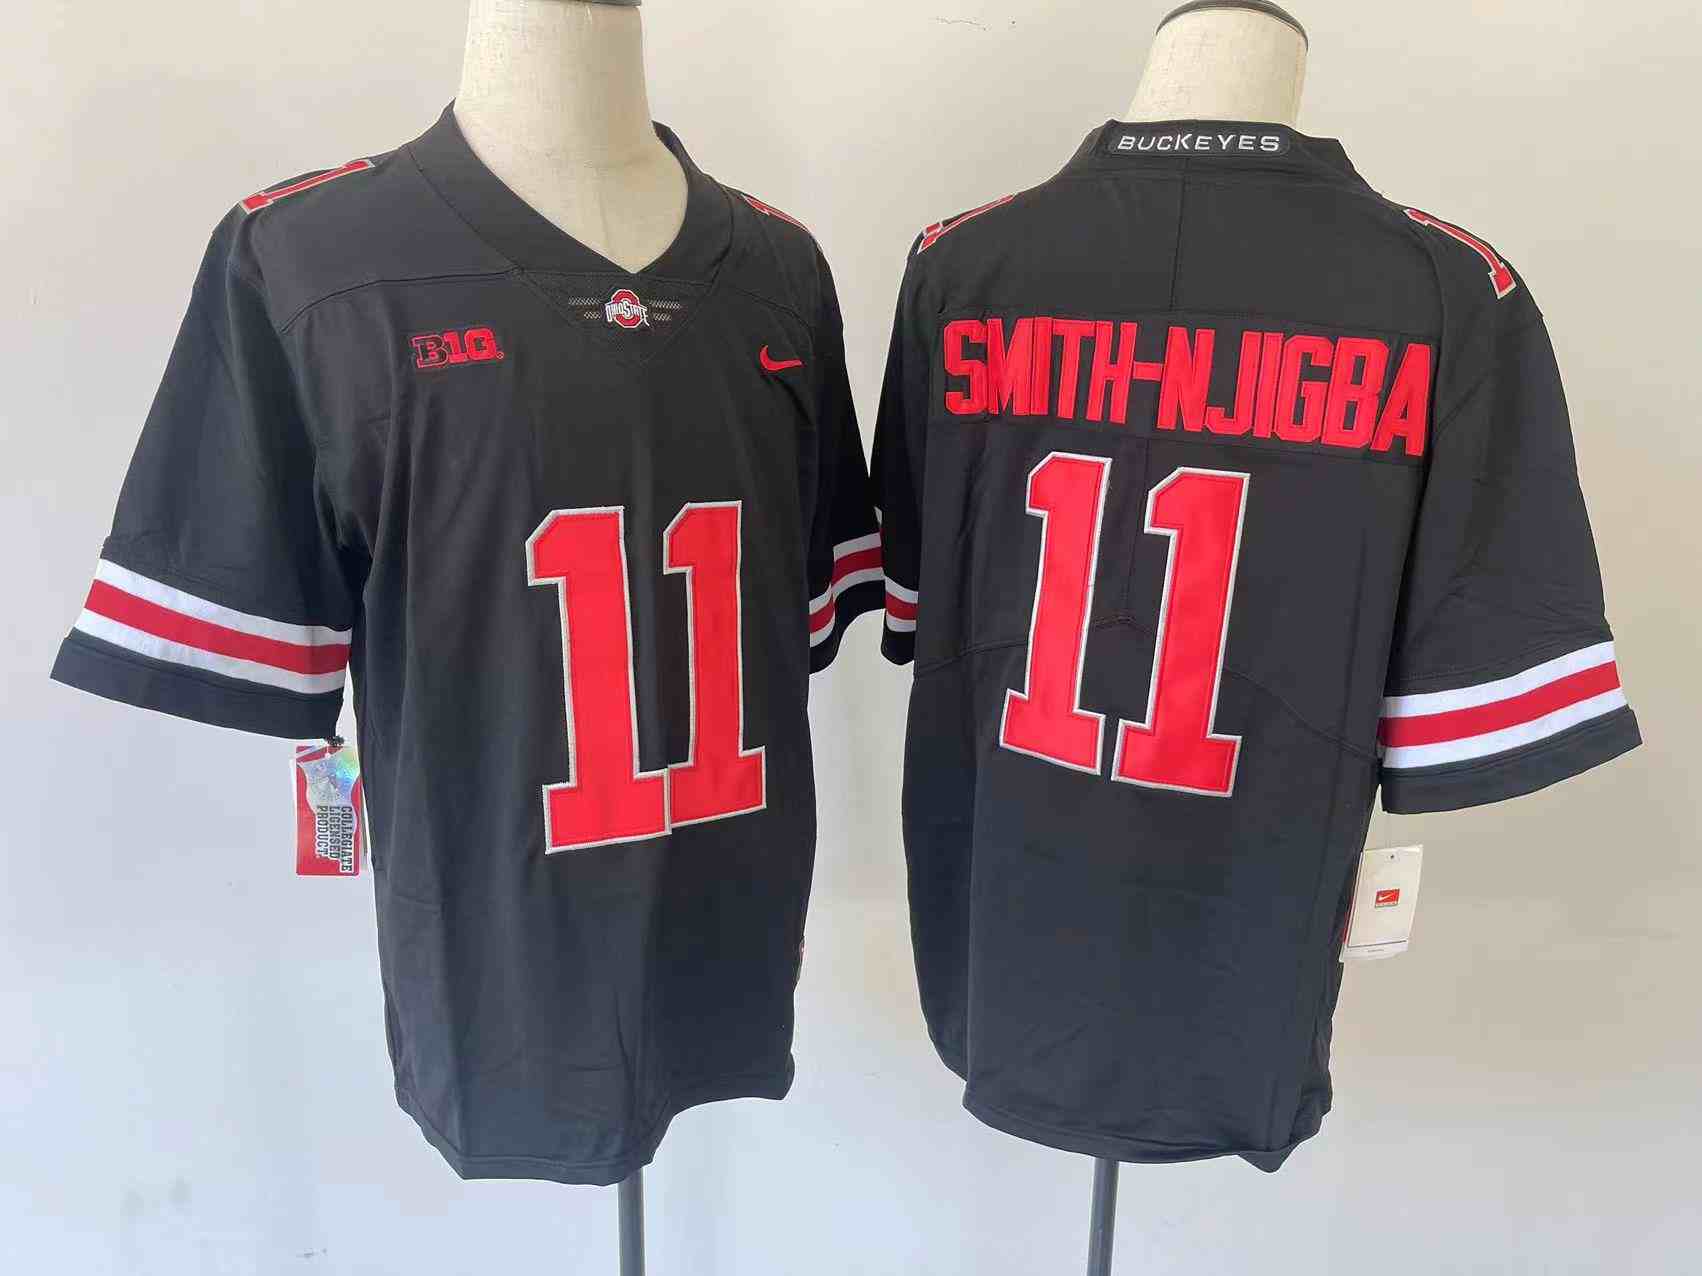 Youth NCAA Ohio State Buckeyes 11  SMITH-NJIGBA Black red letter College Football Jersey